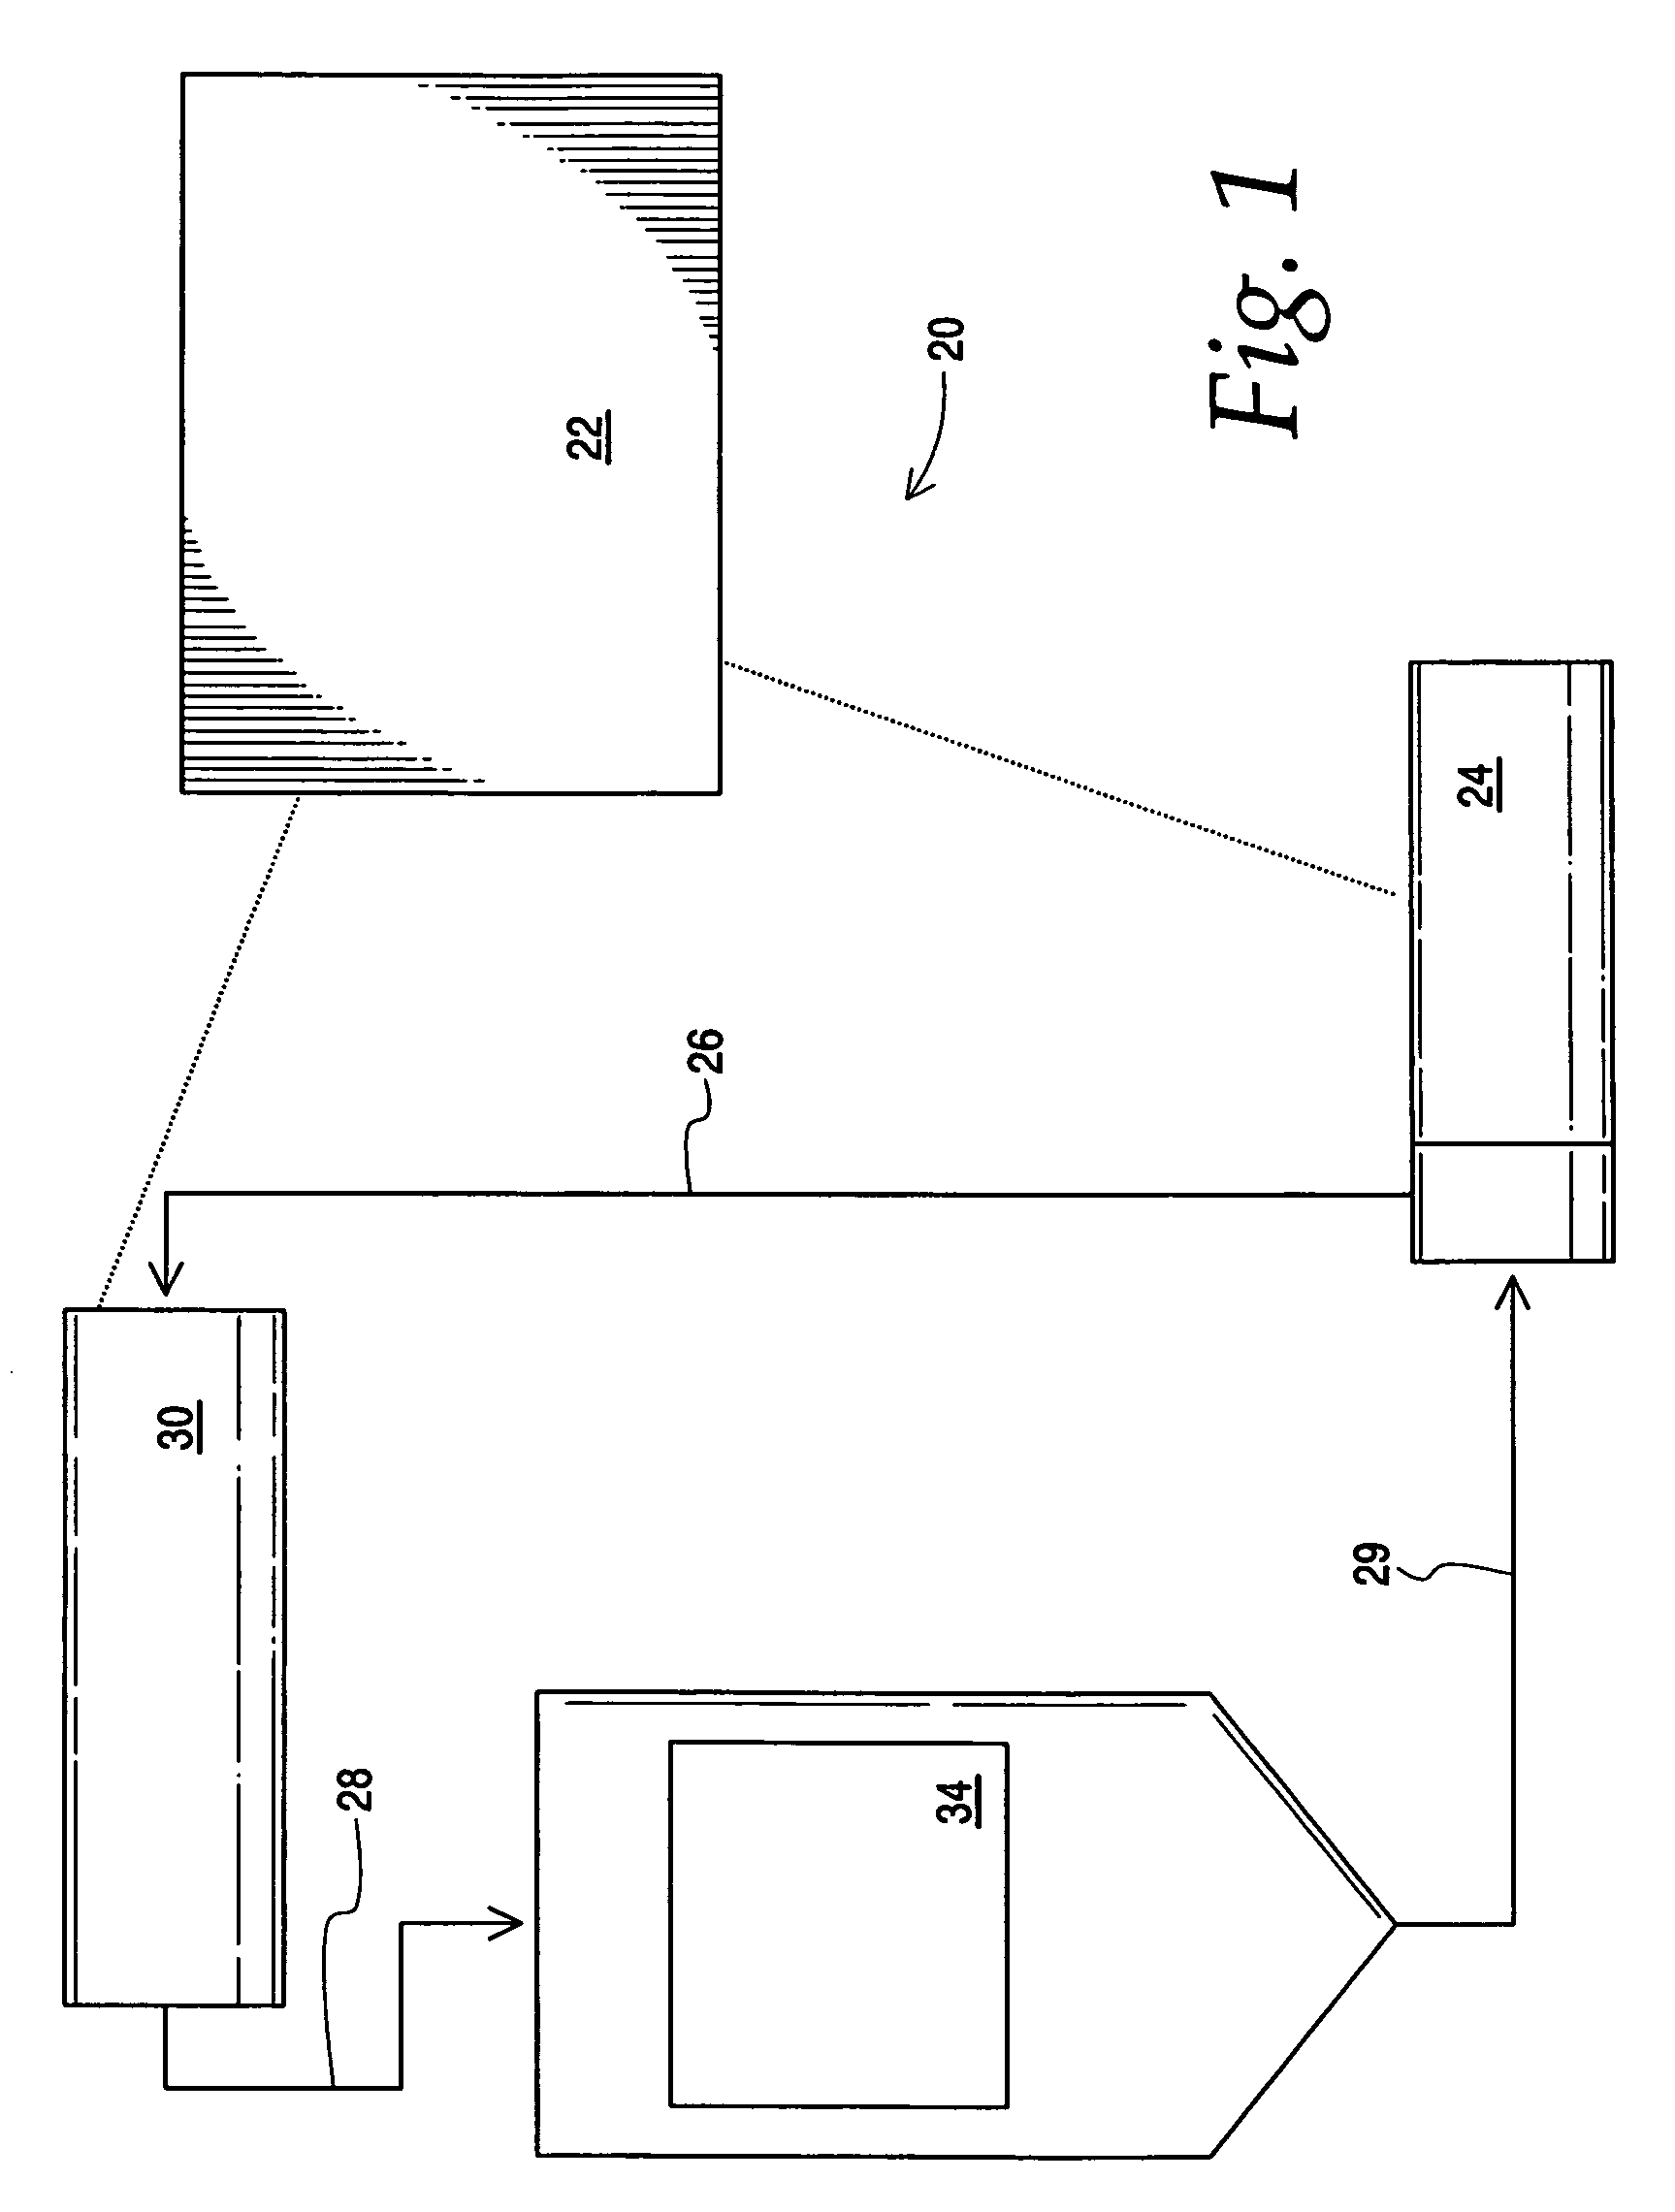 Apparatus for pasteurizing milk for feeding to calves